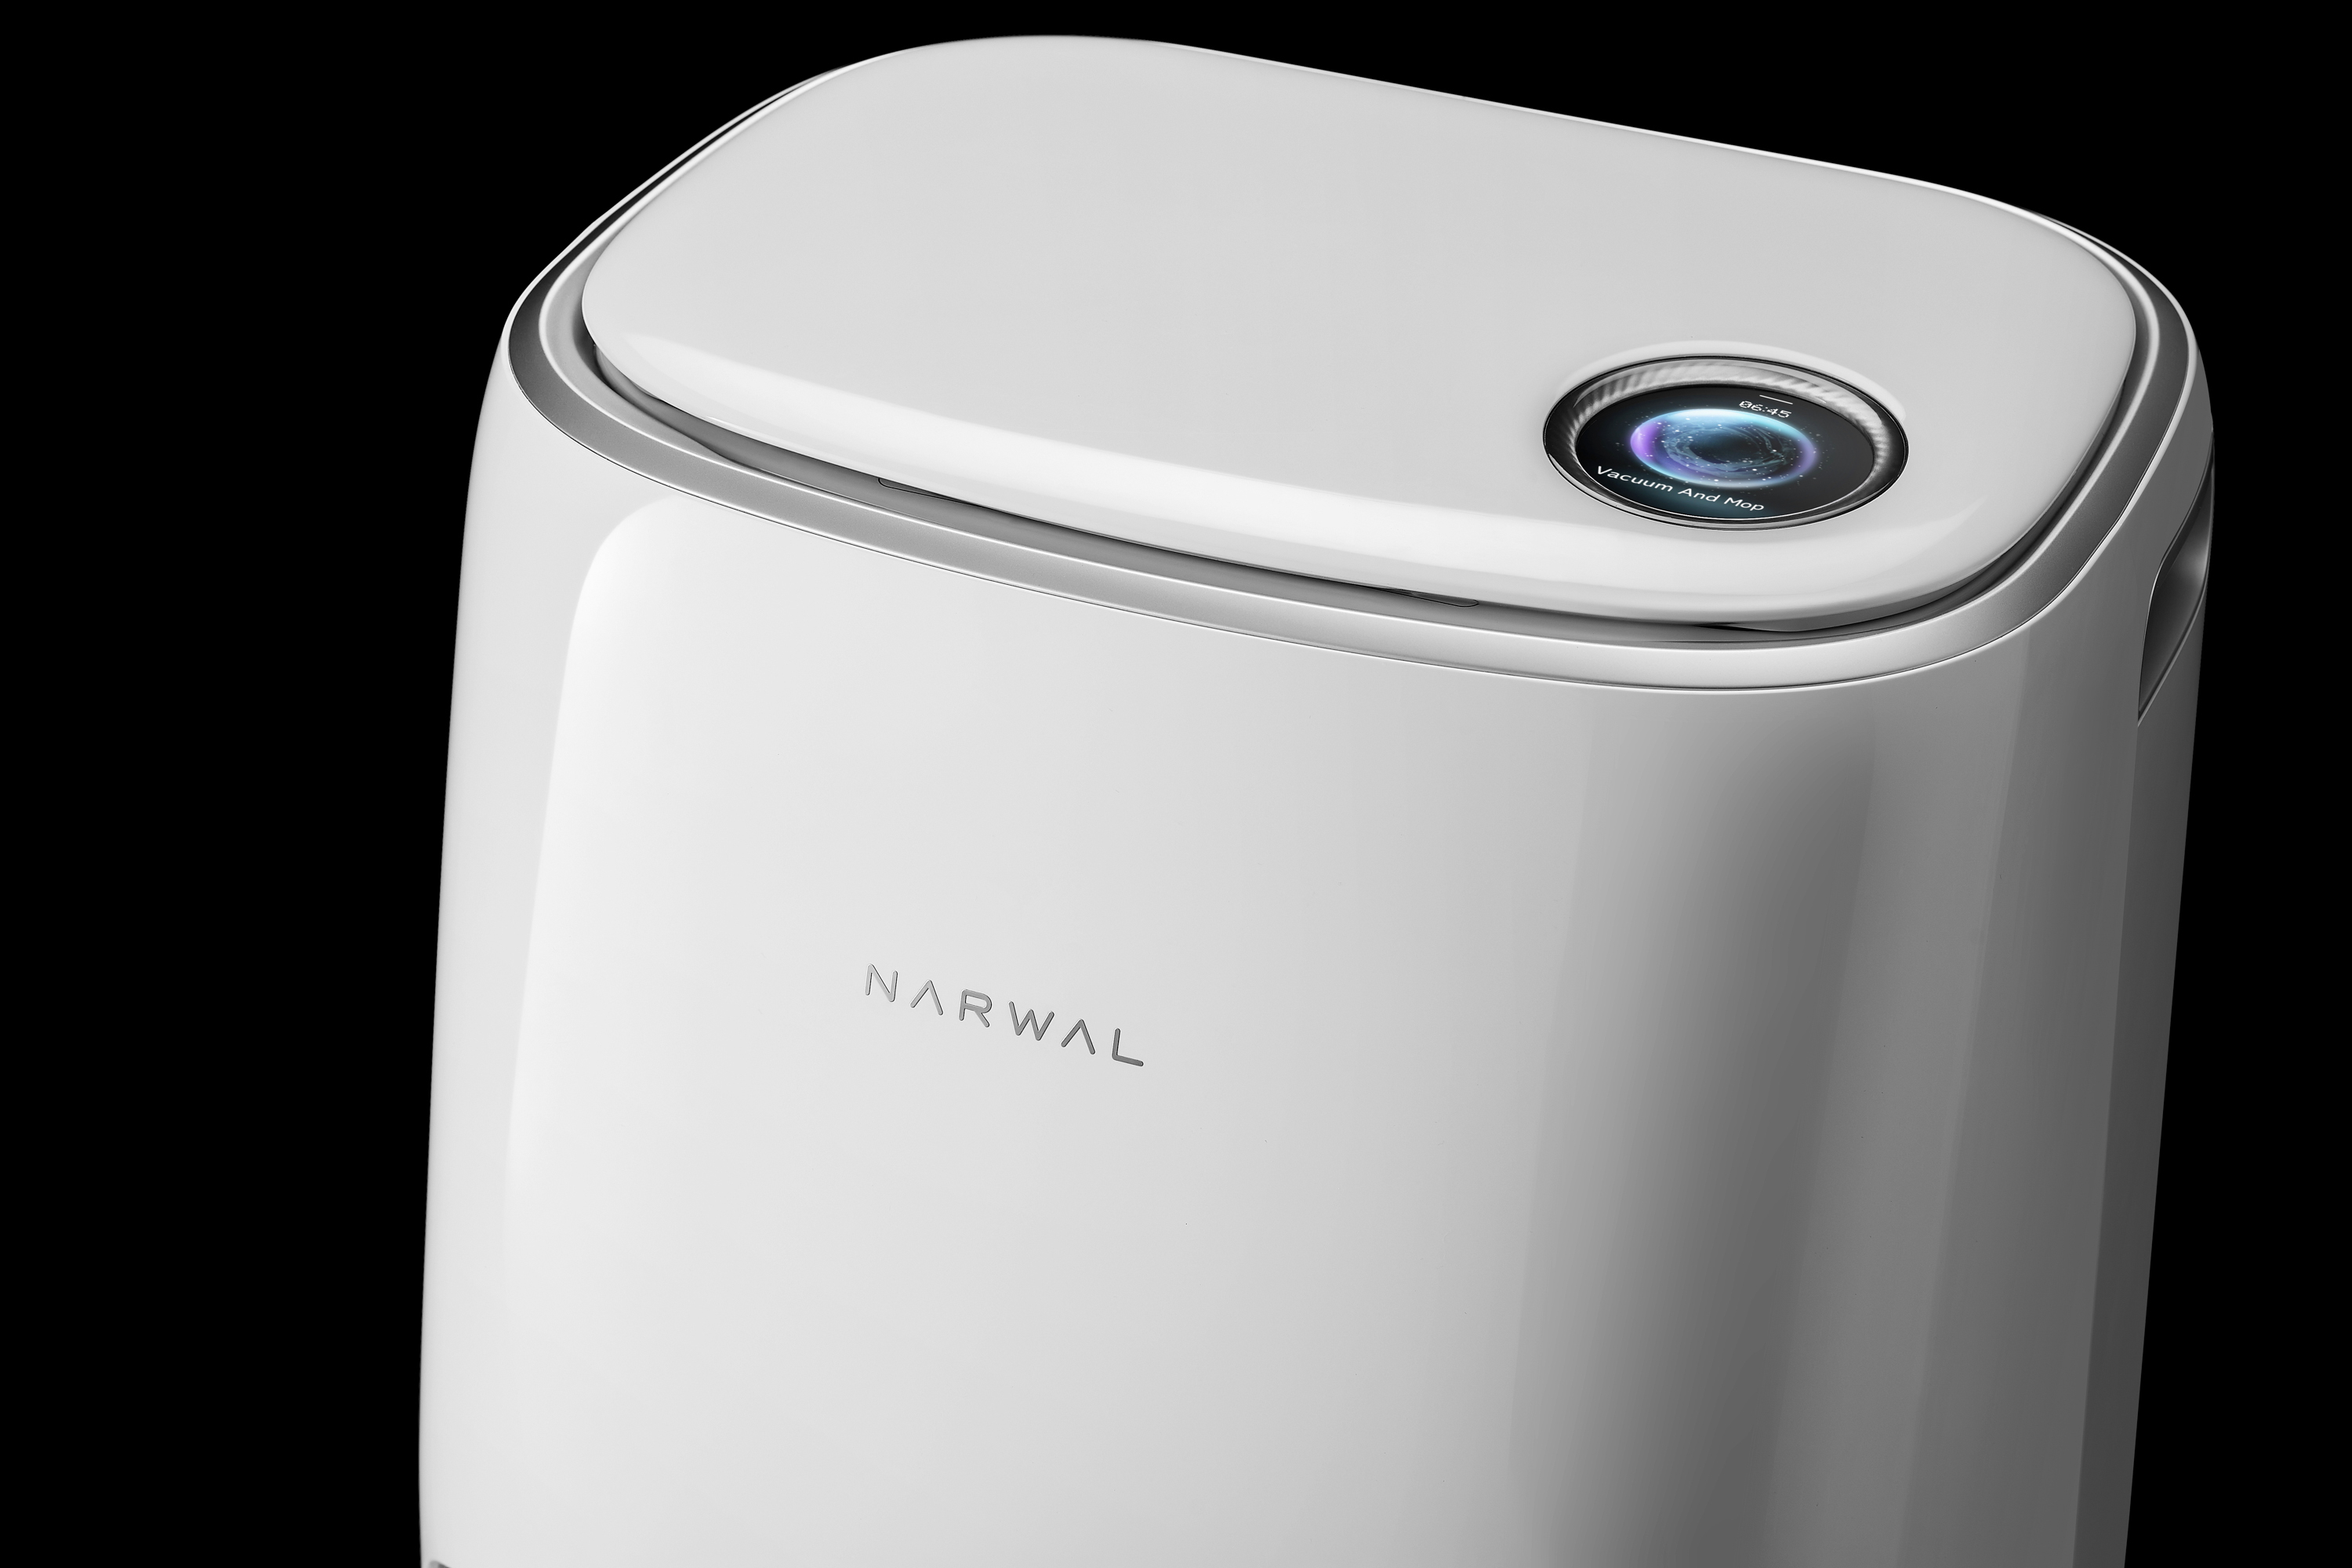 Narwal Freo vacuums and mops your home with smart features